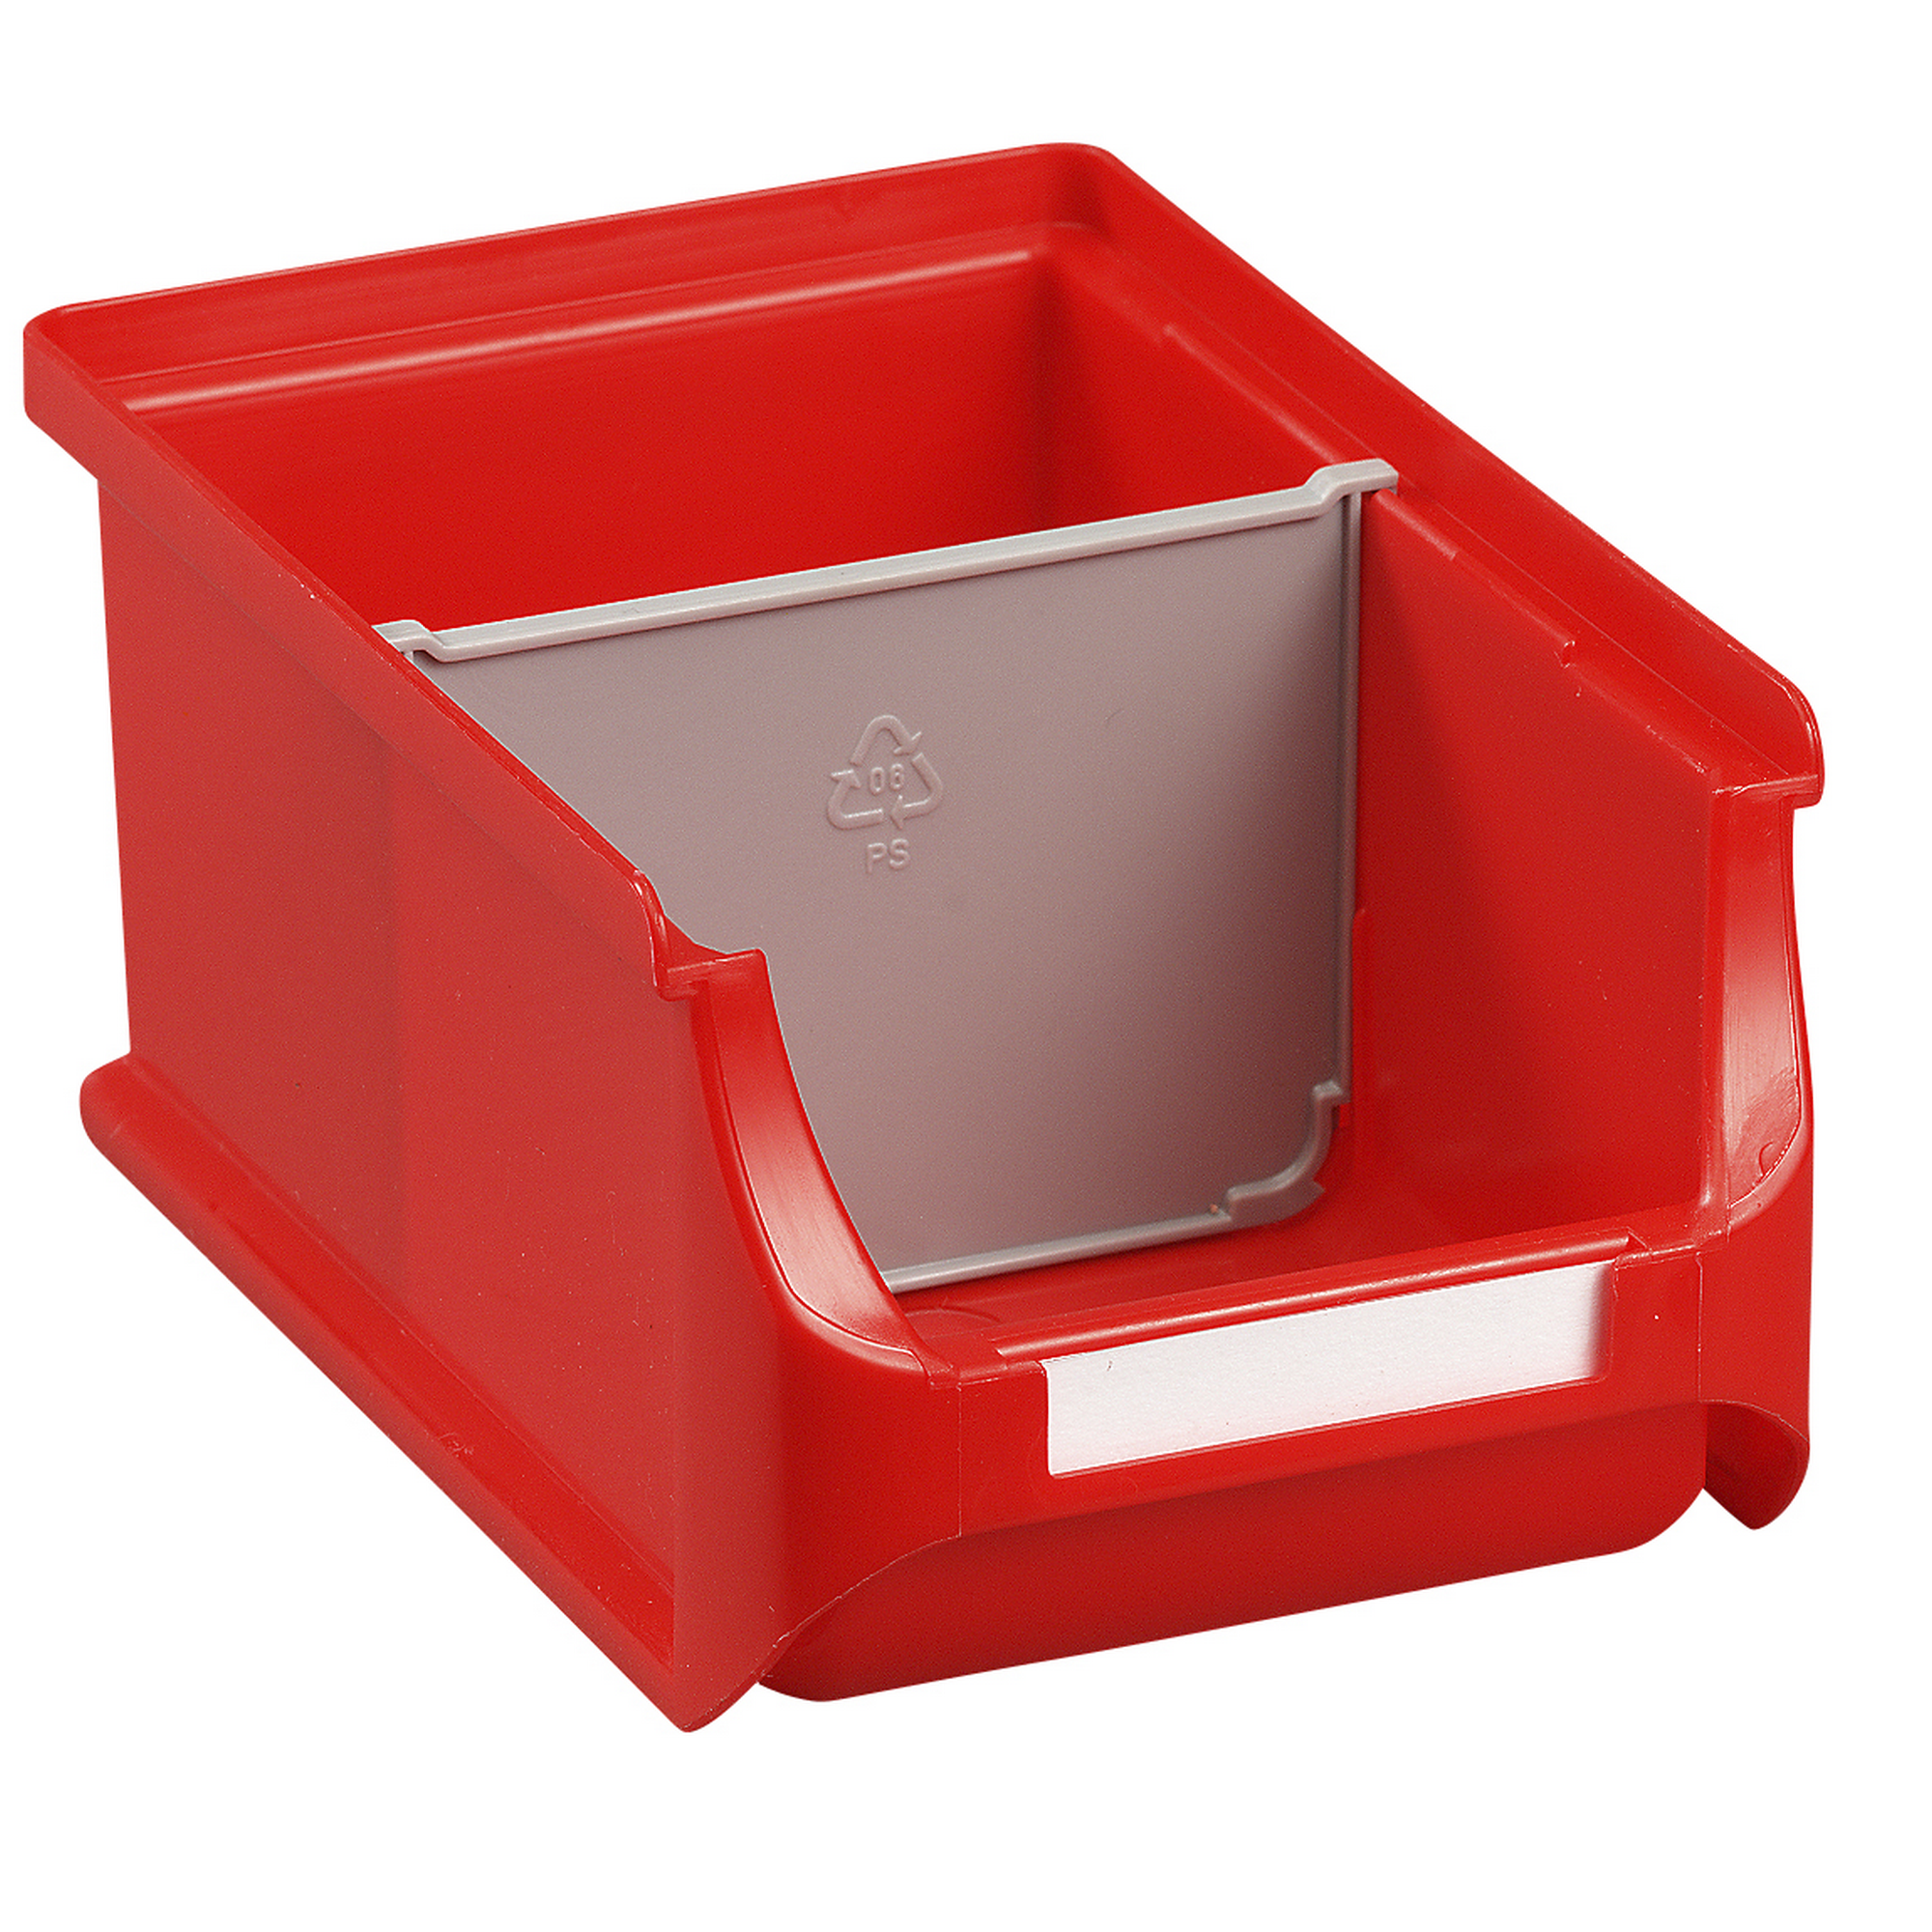 ProfiPlus Stapelsichtbox 'Box 3' rot 23,5 x 15 x 12,5 cm + product picture